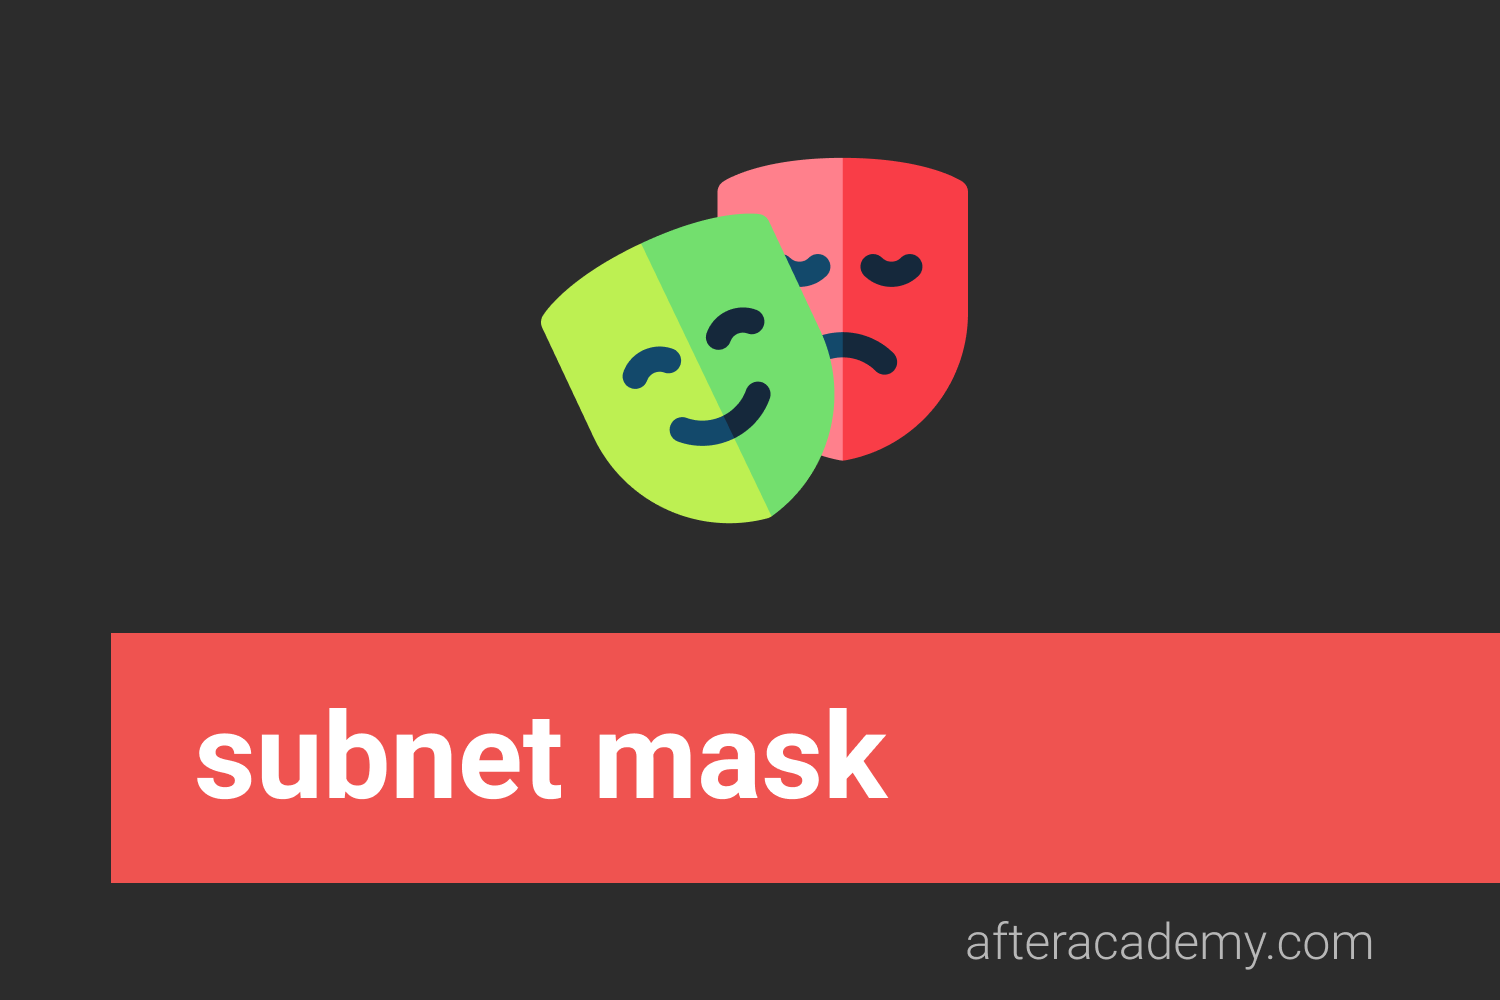 What is a Subnet mask?